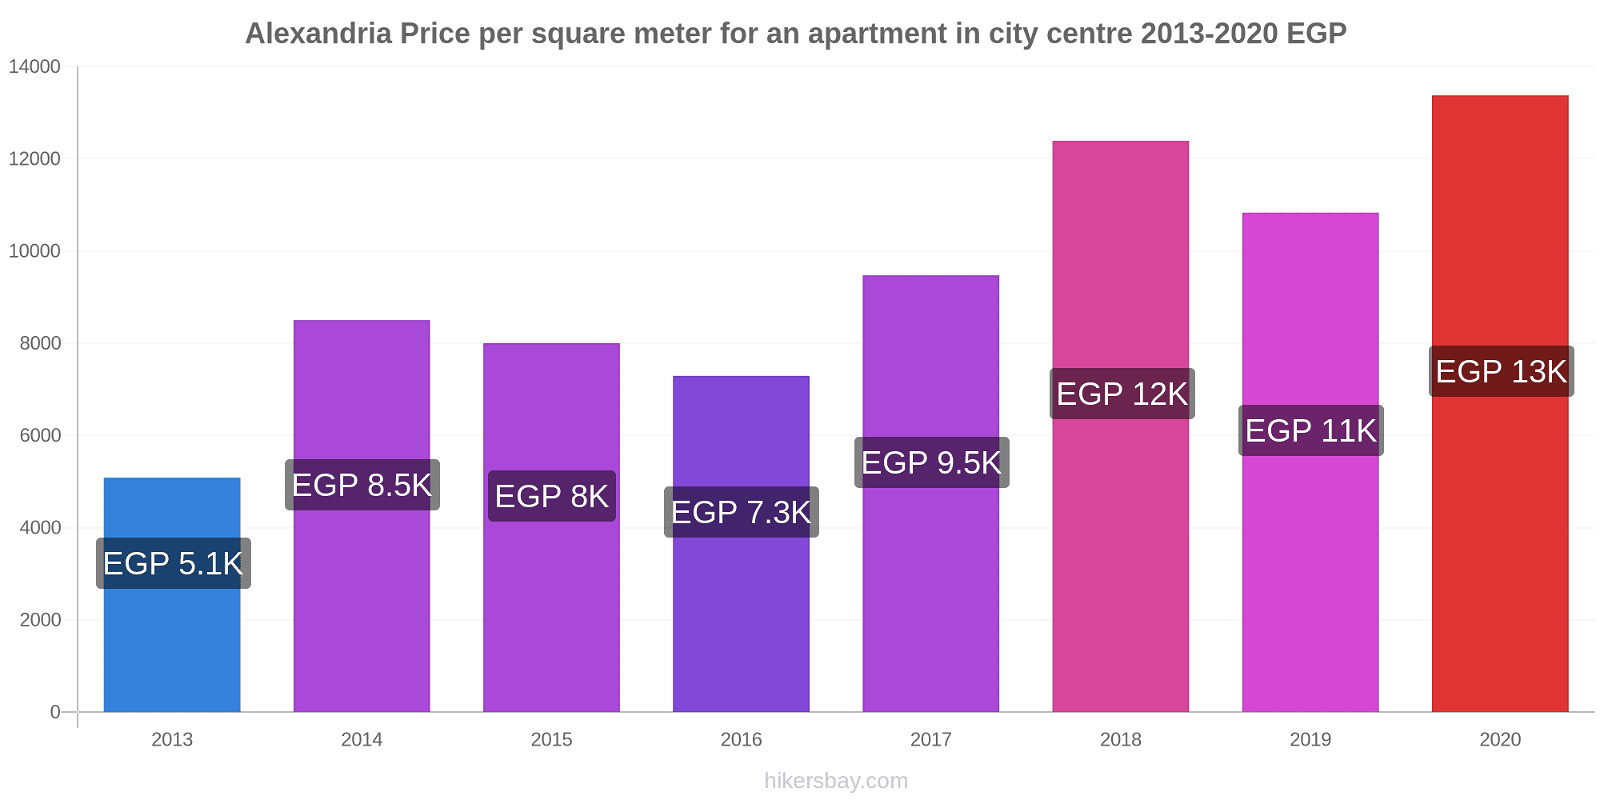 Alexandria price changes Price per square meter for an apartment in city centre hikersbay.com